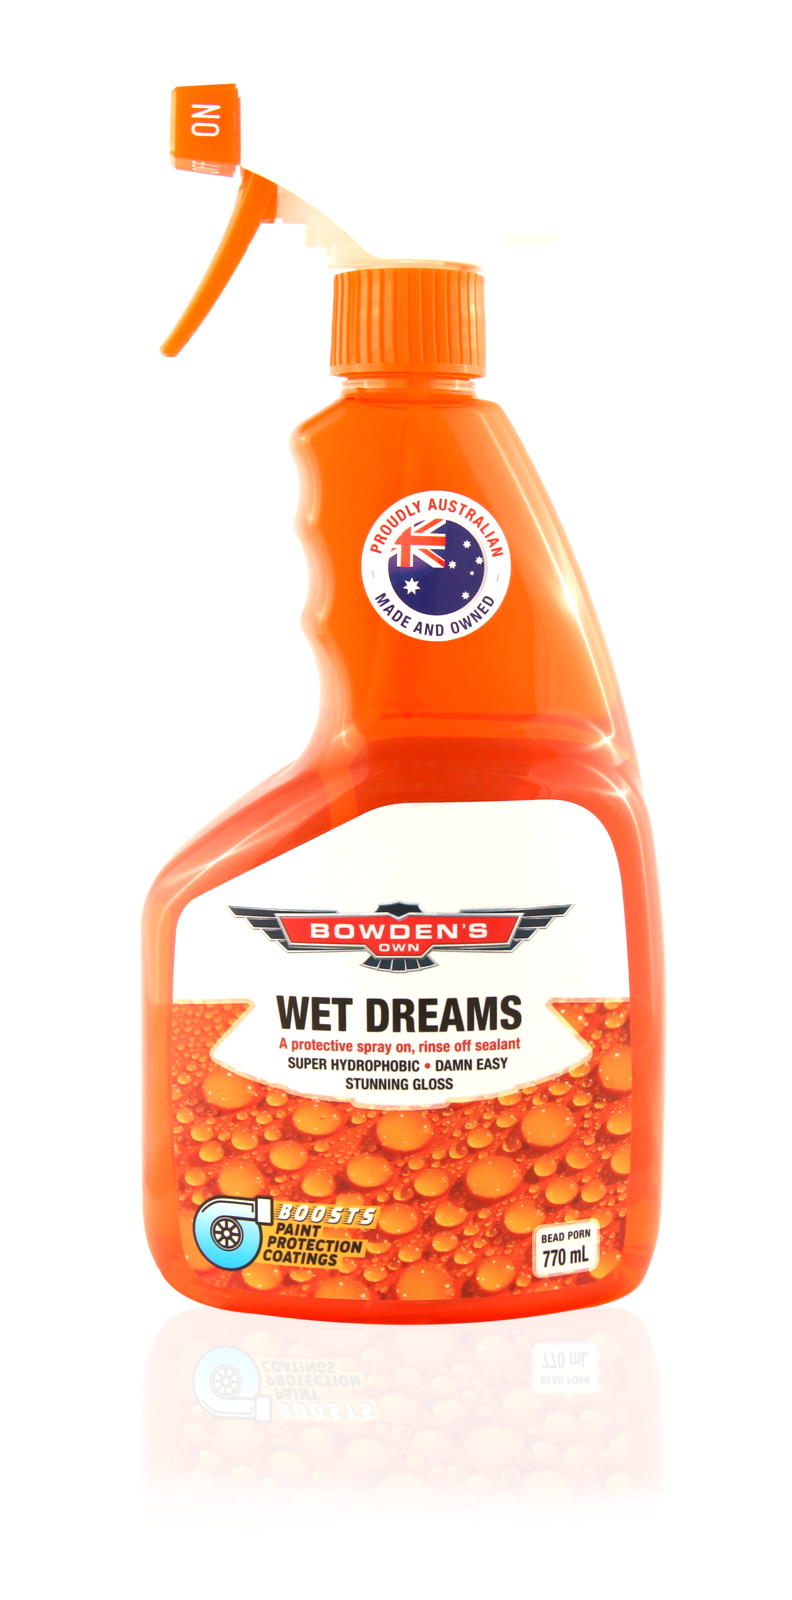 BOWDENS OWN WET DREAMS A PROTECTIVE SPRAY ON, RINSE OFF SEALANT